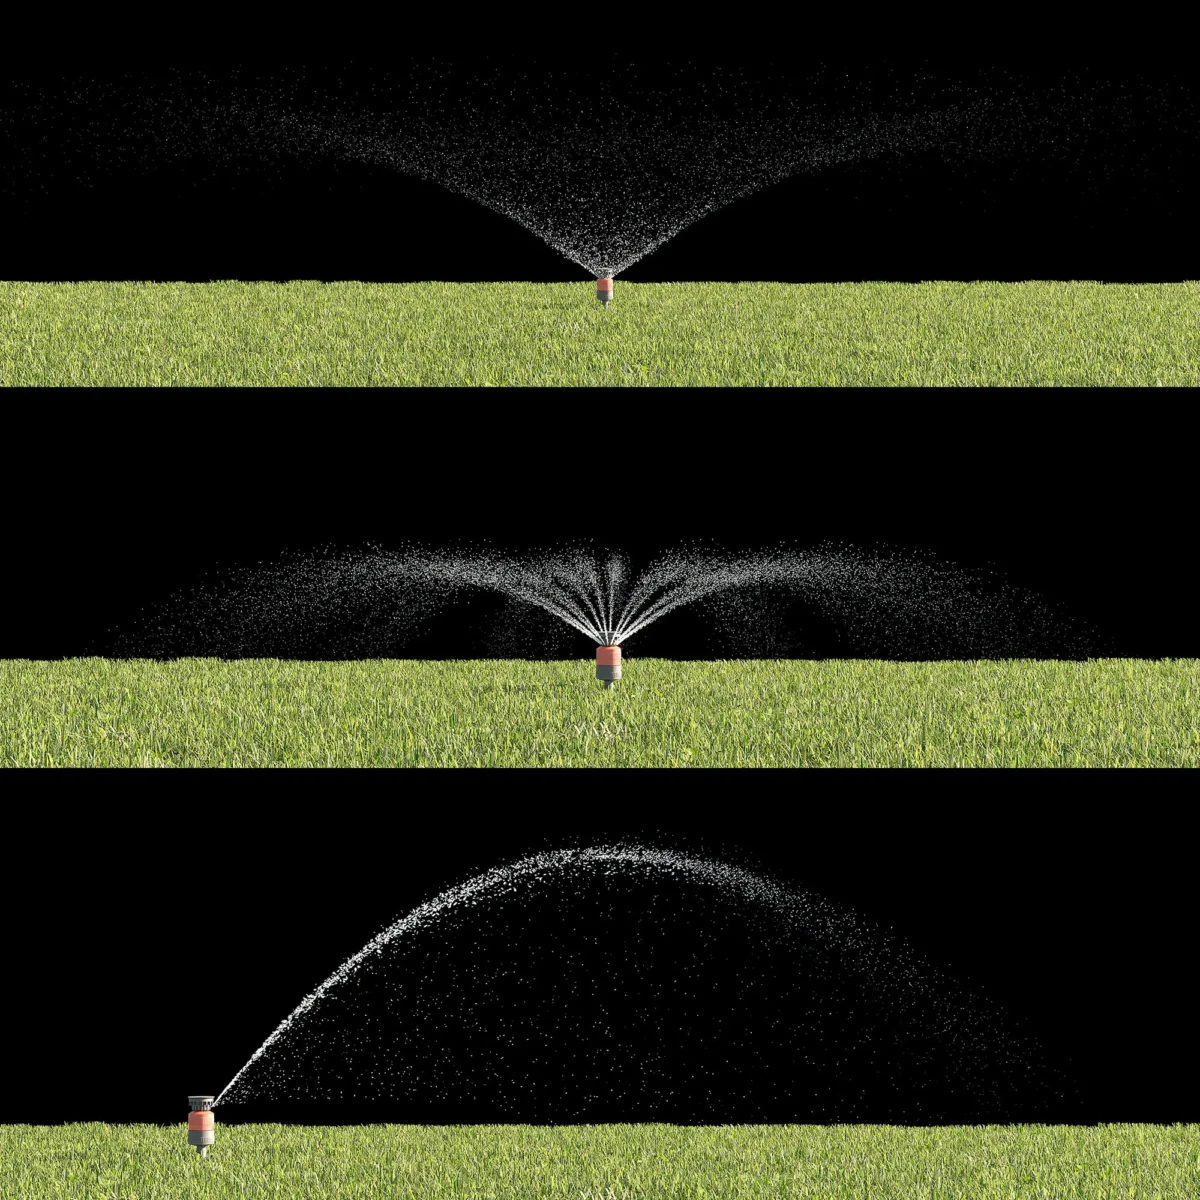 Watering the lawn 3D model download on cg.market, 3ds max, Corona Render.